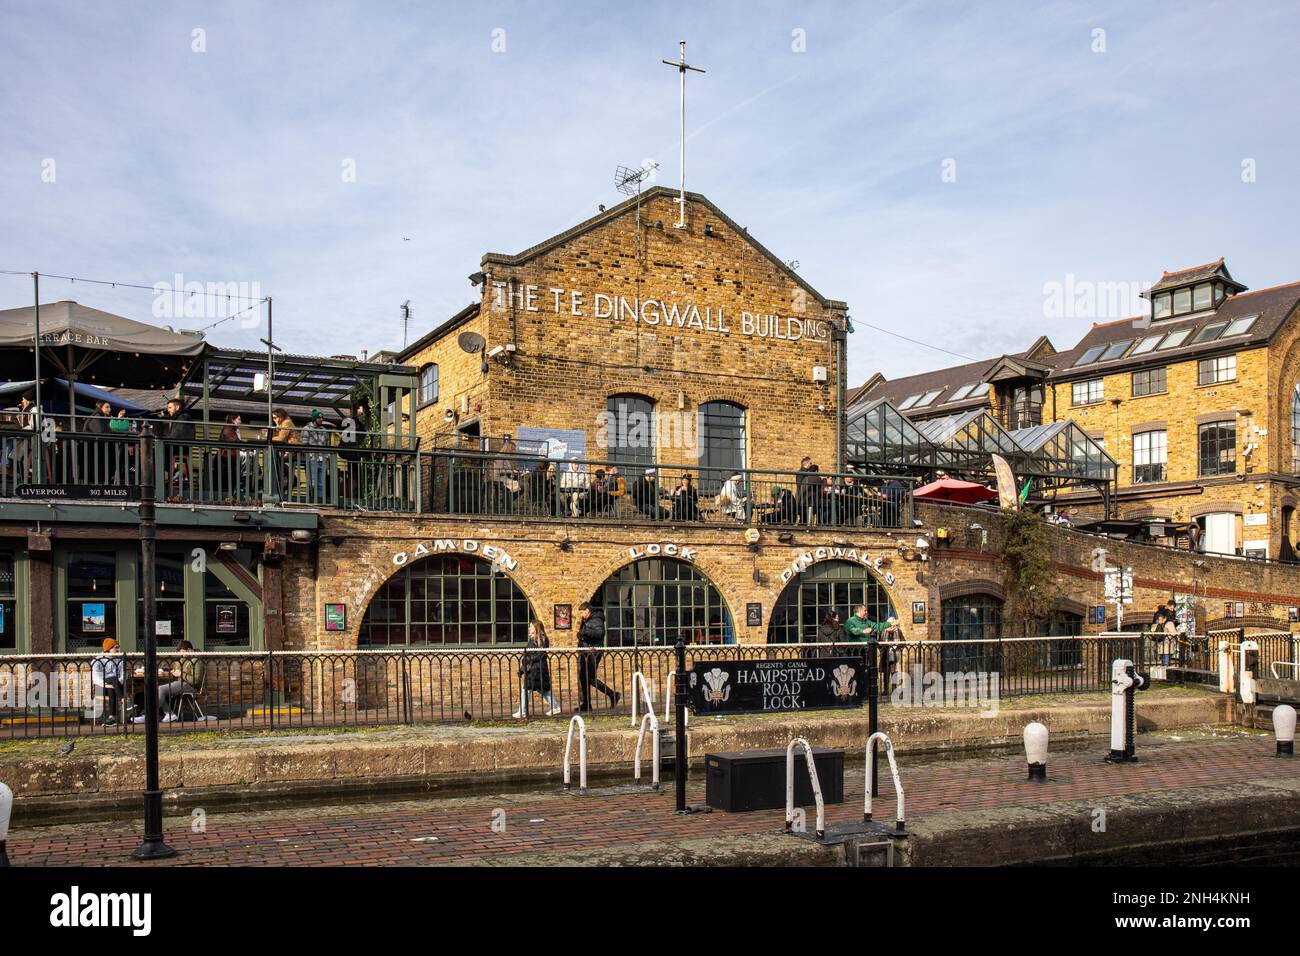 Dingwall's live music venue in Camden Town district of London, England Stock Photo